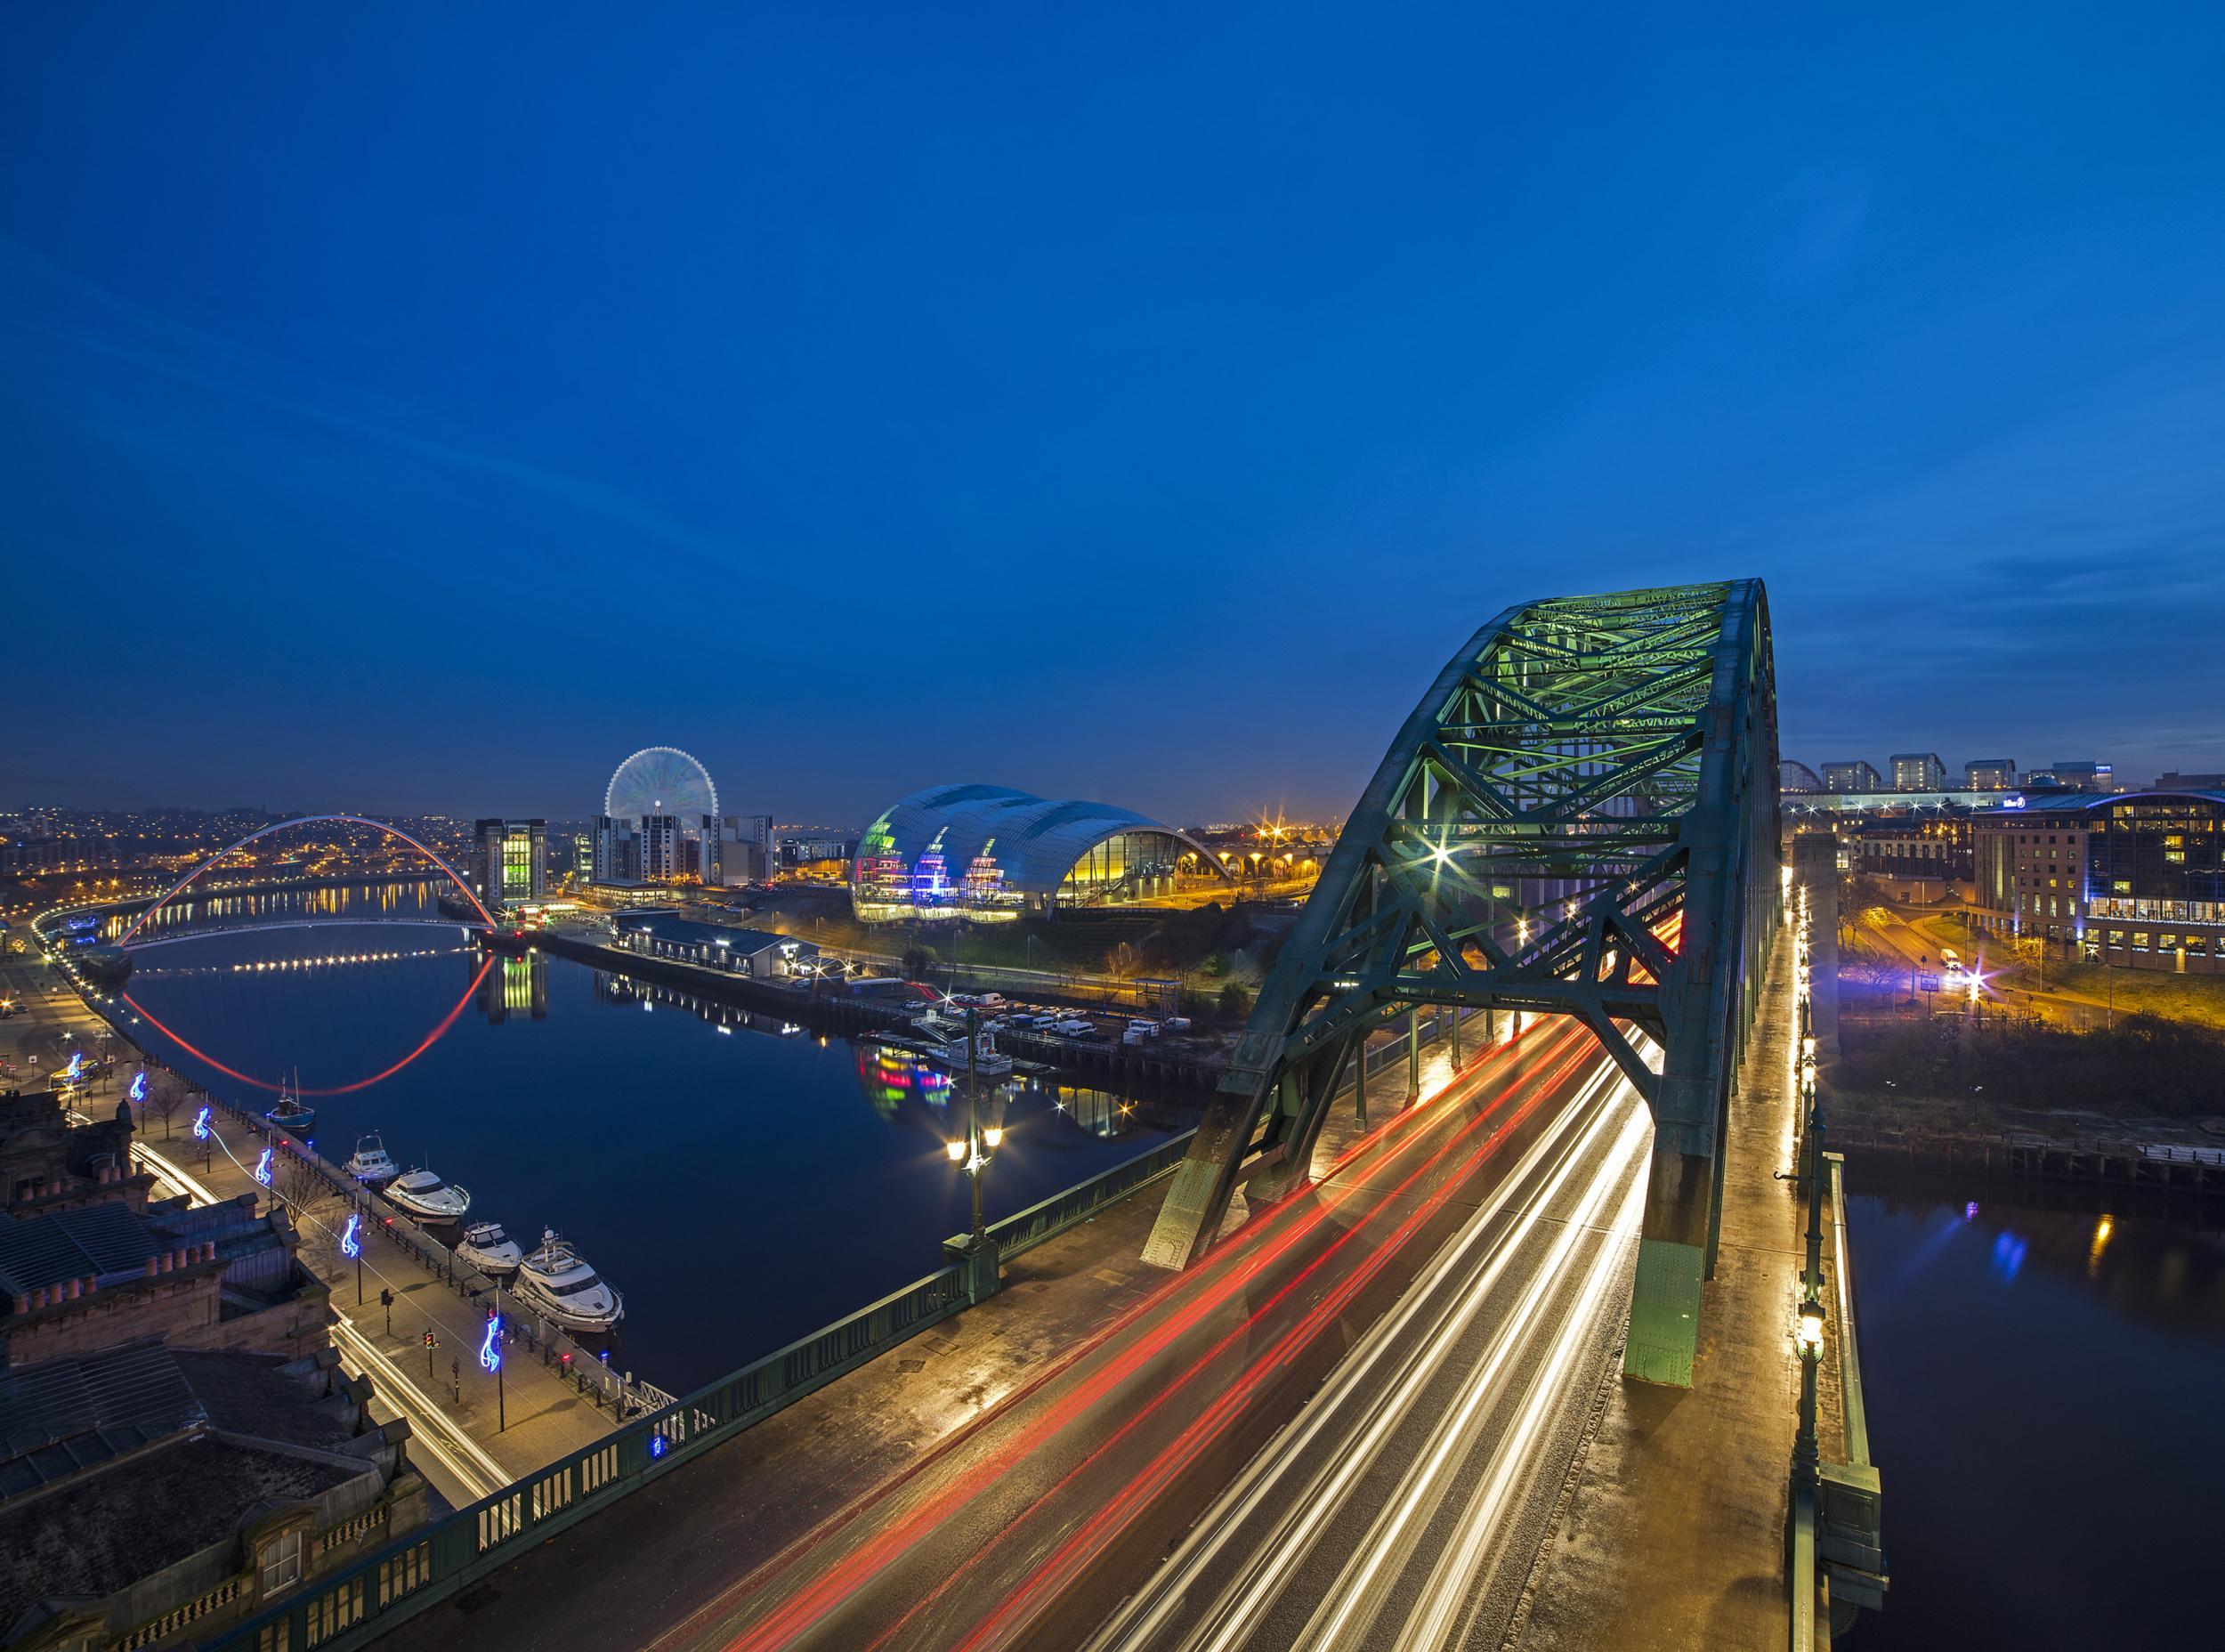 Artists’ impression of the Newcastle wheel with the Tyne Bridge in the foreground